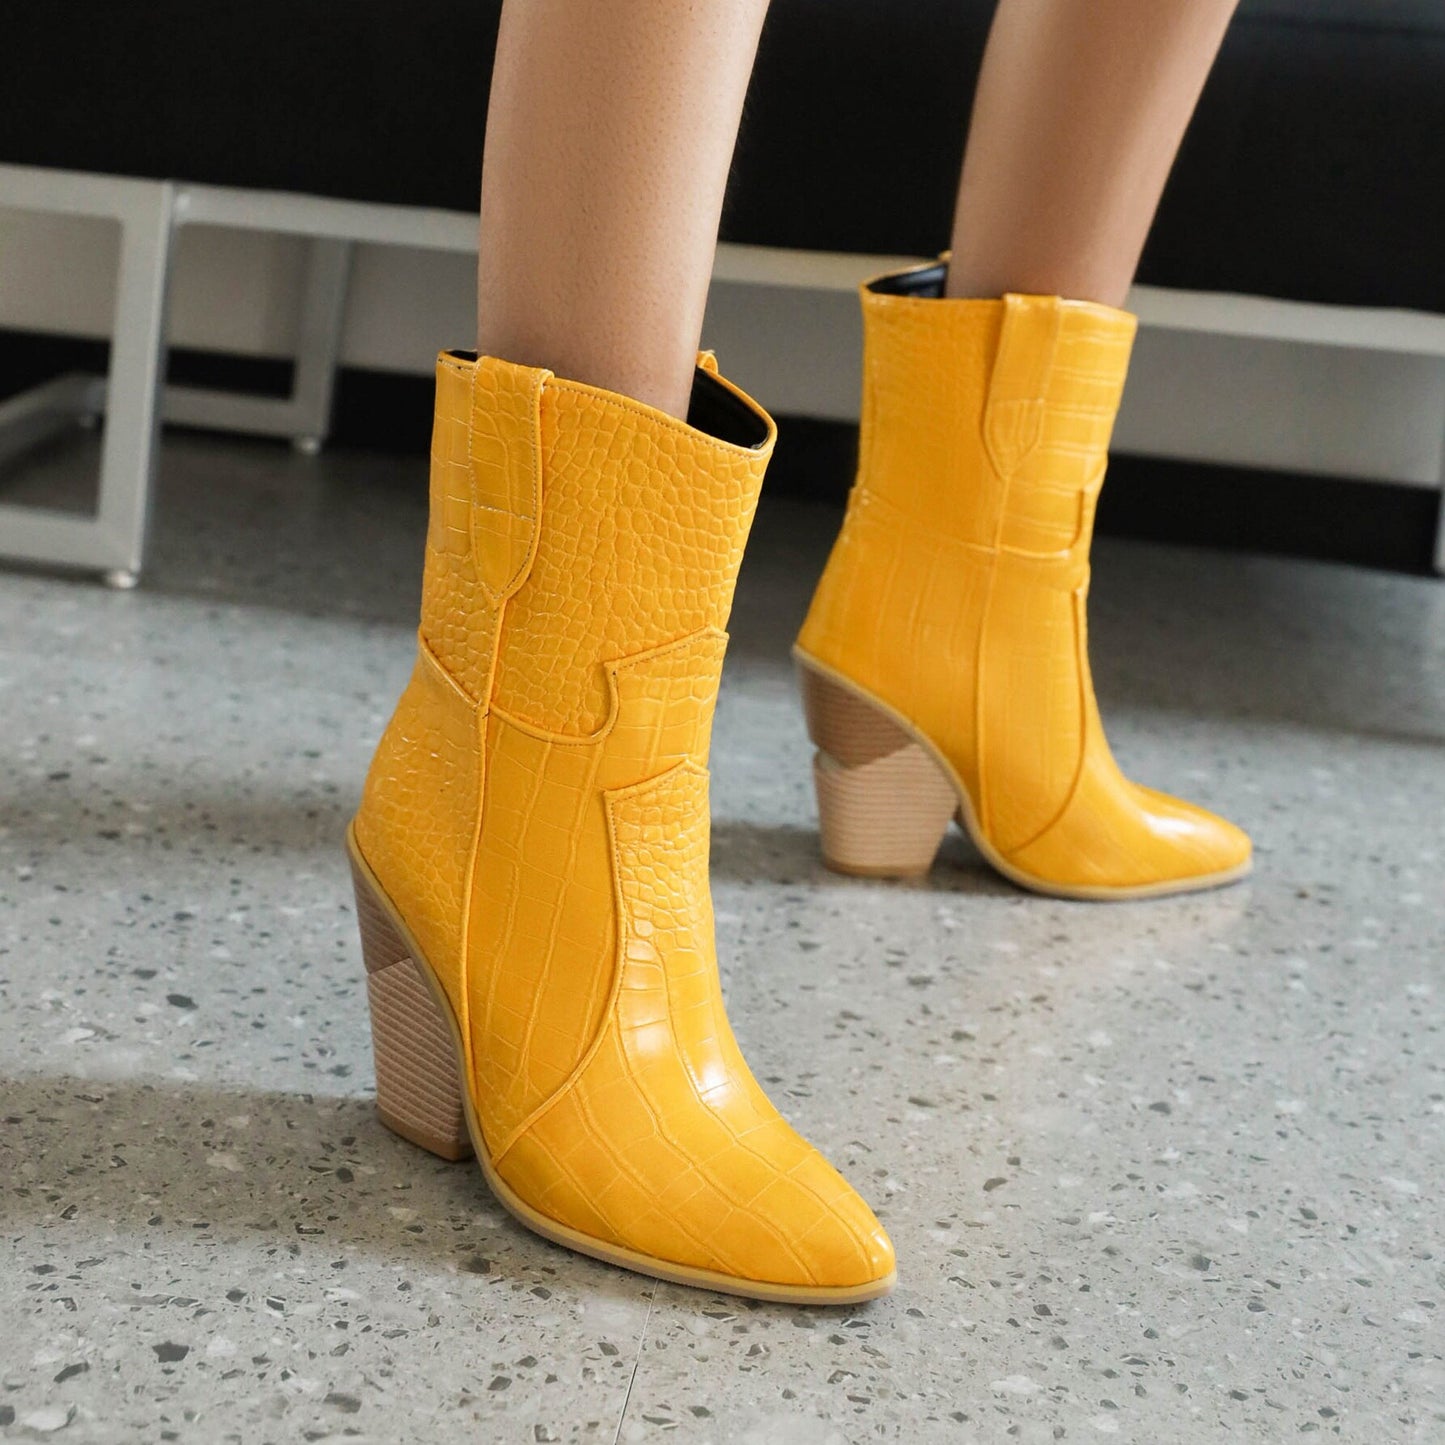 New Autumn Women Boots PU Leather Wedge High Heel Ankle Boots Winter Boots Fashion Western Boots Denim Shoes